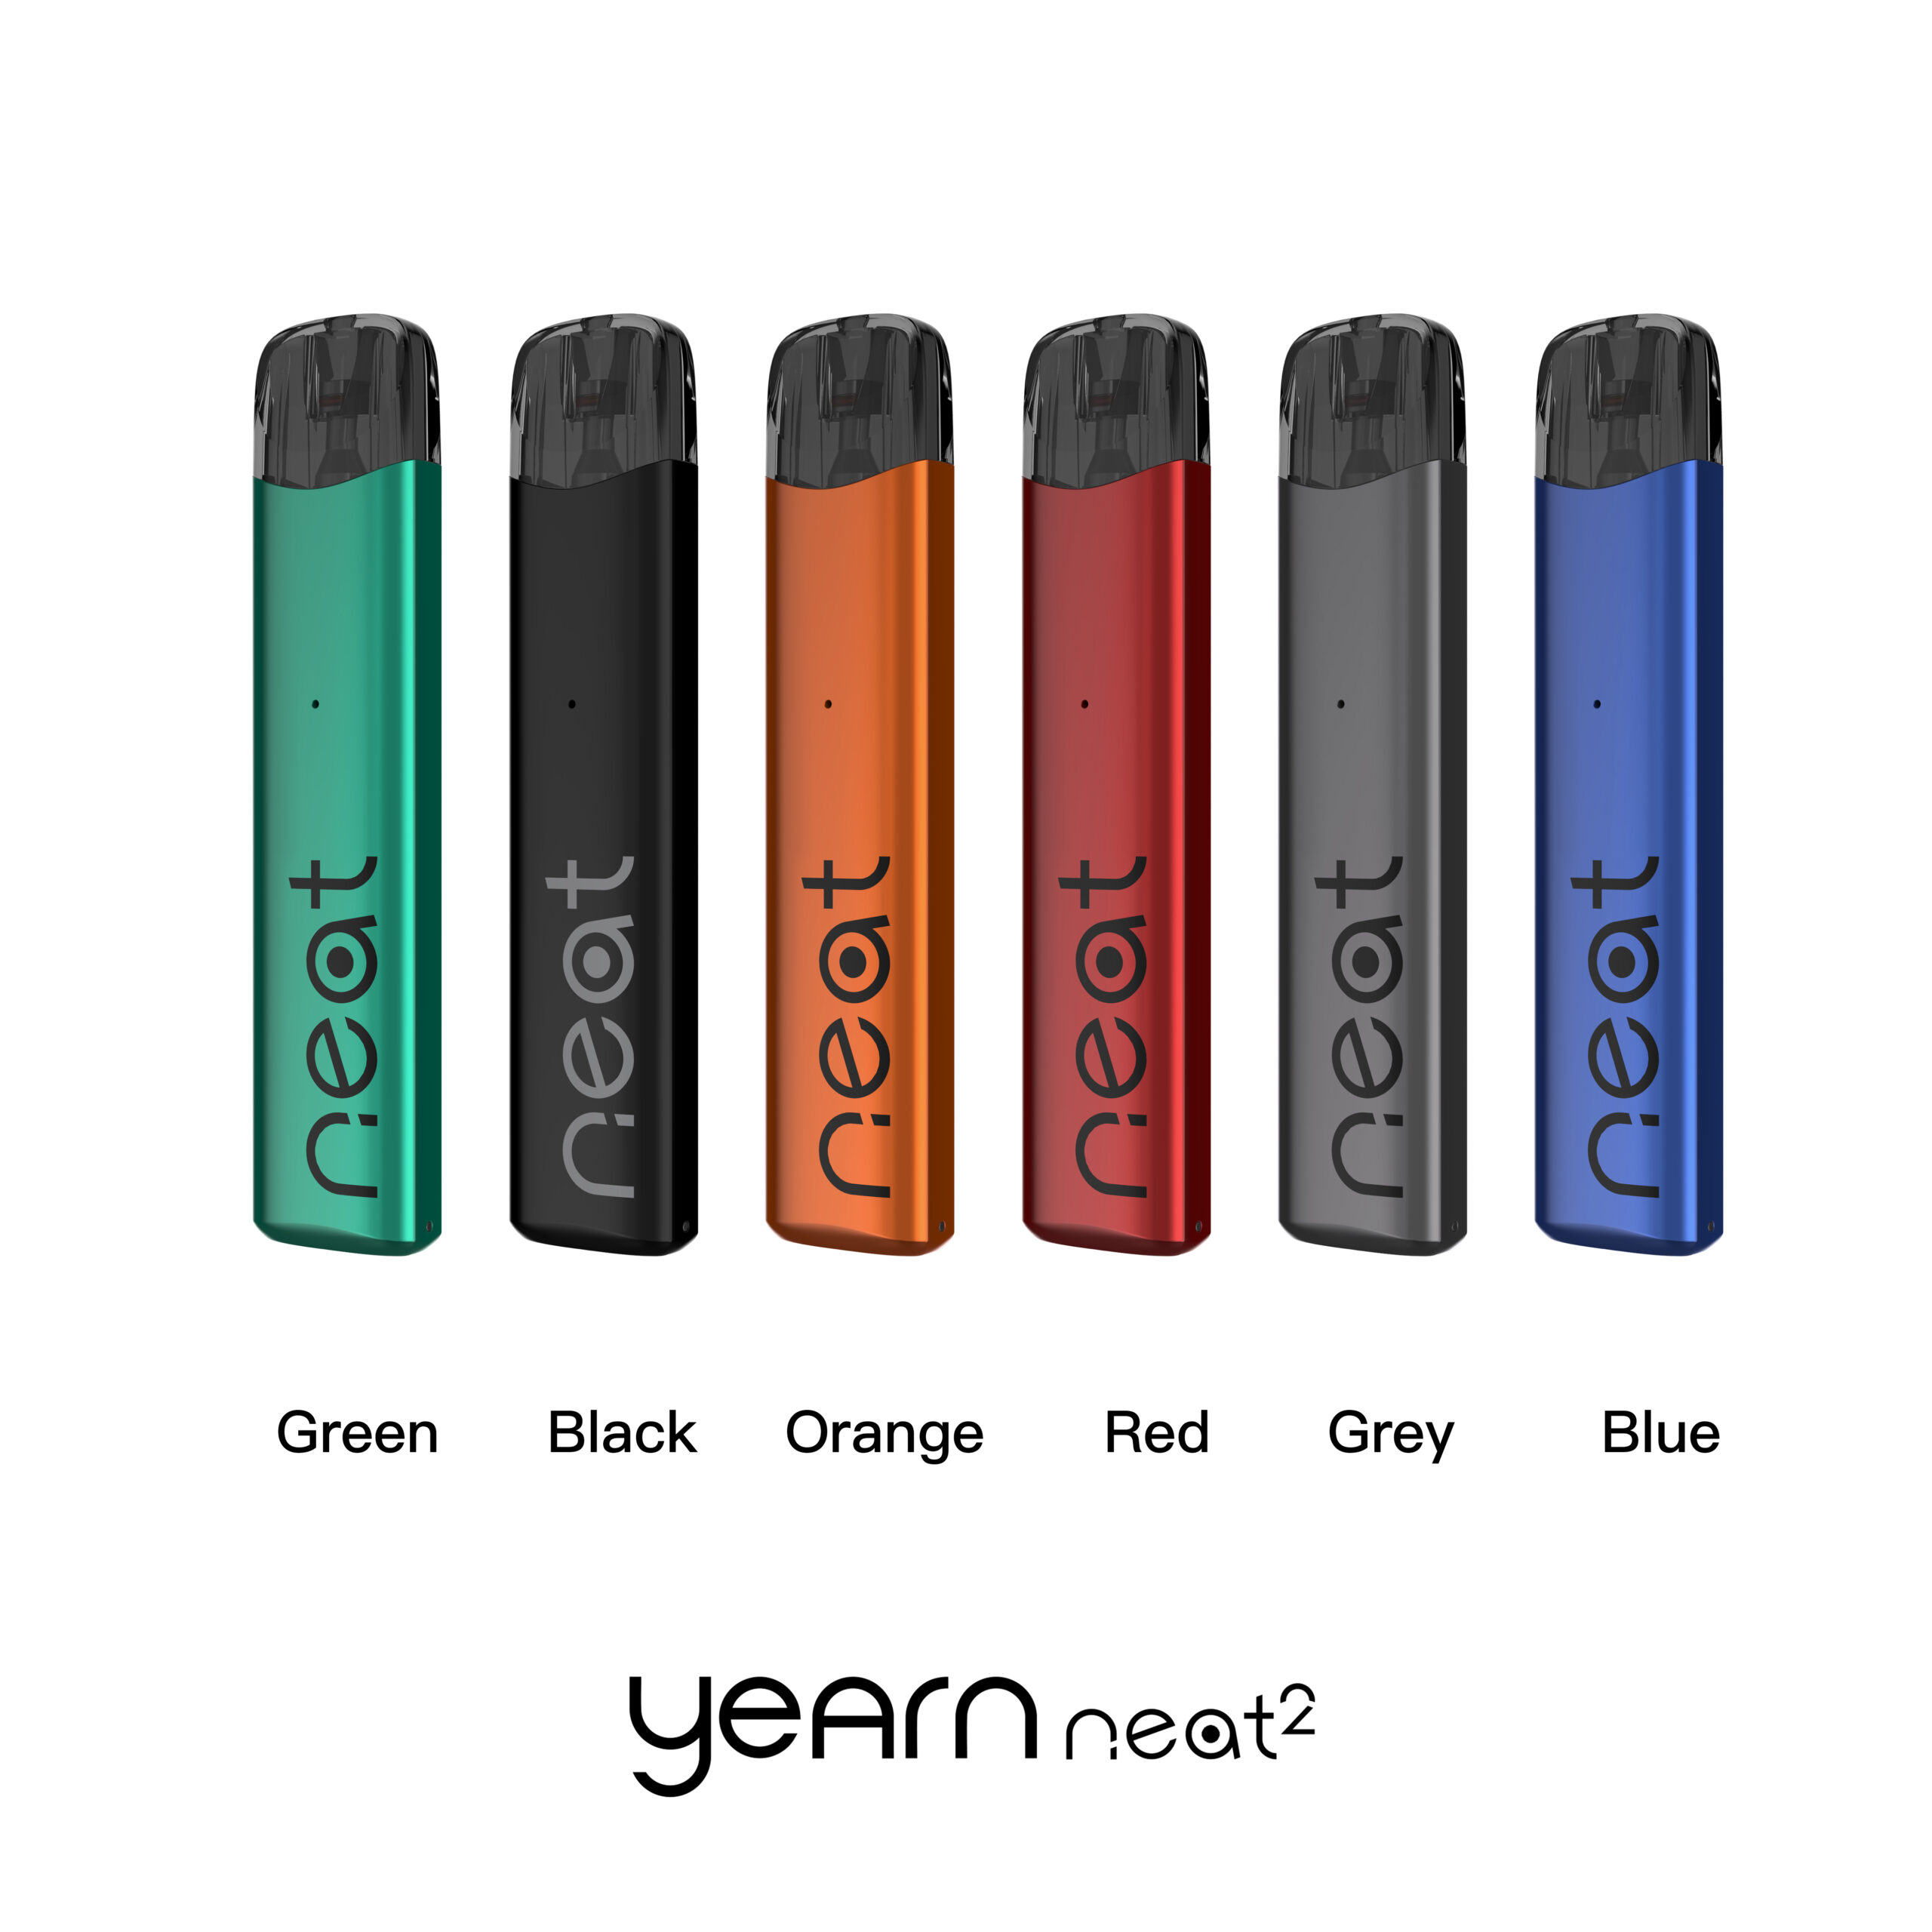 UWELL yearn neat 2 pod kit all colors available